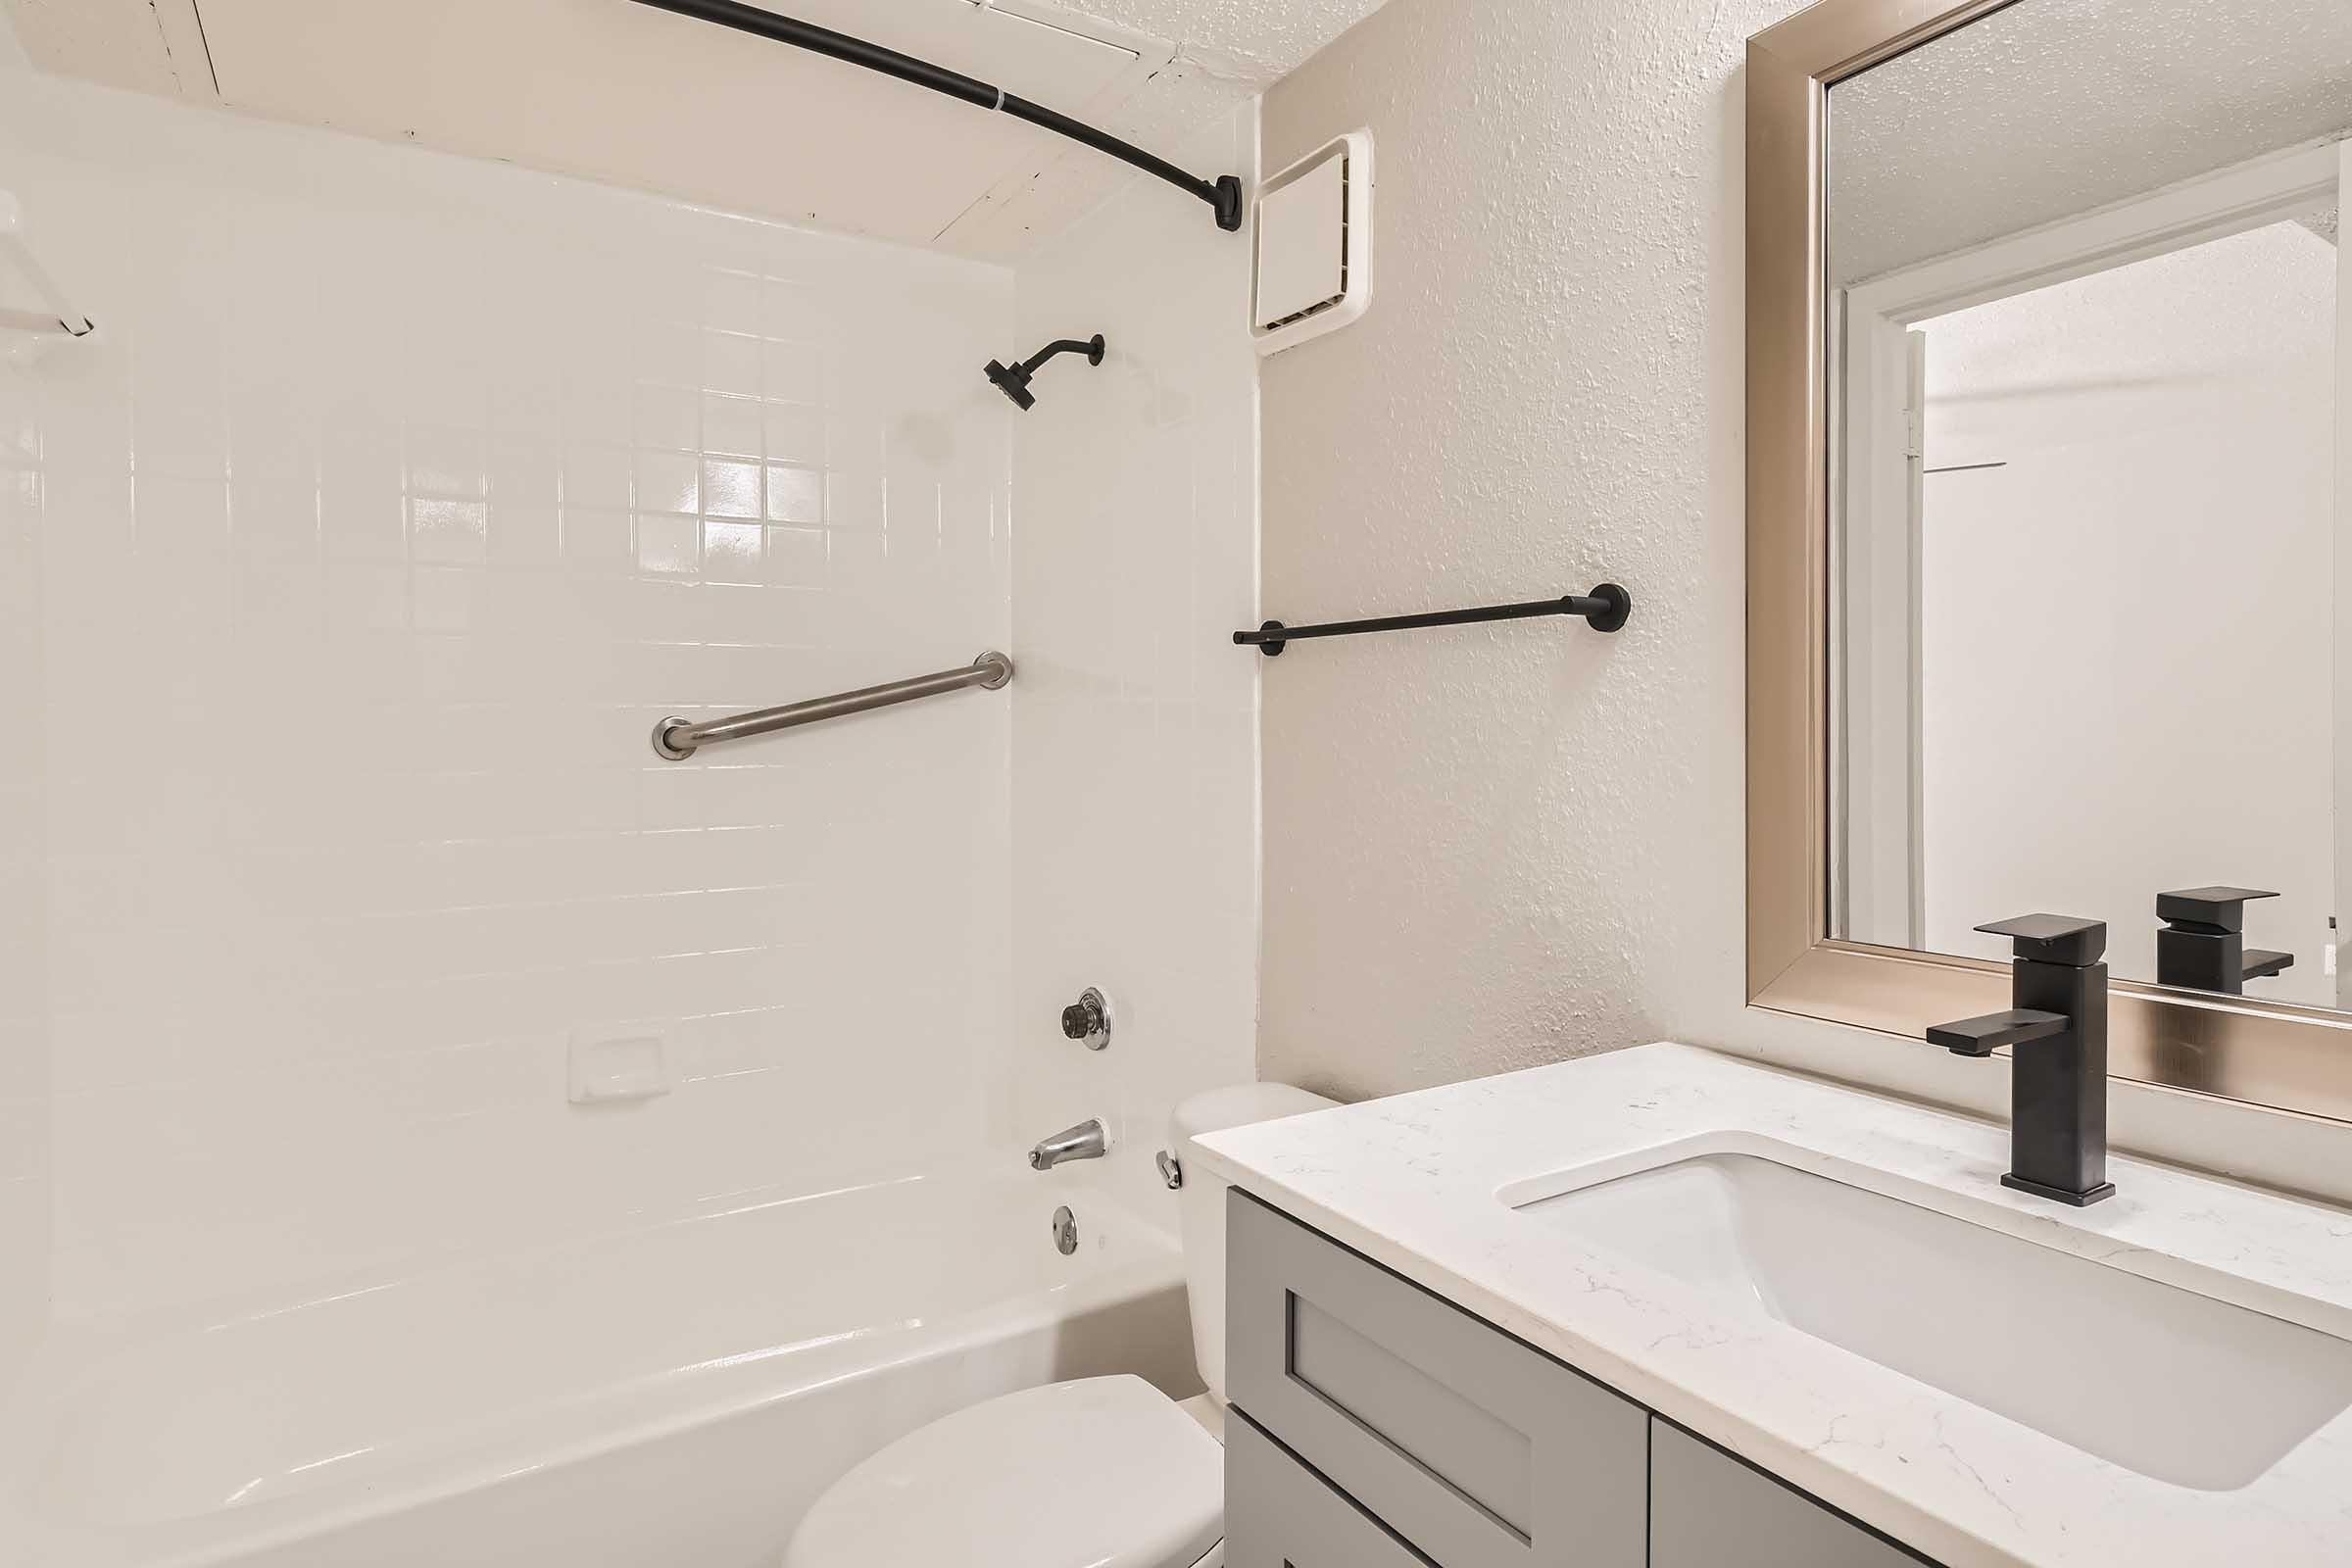 An apartment bathroom with a tub and shower at Rise North Arlington.